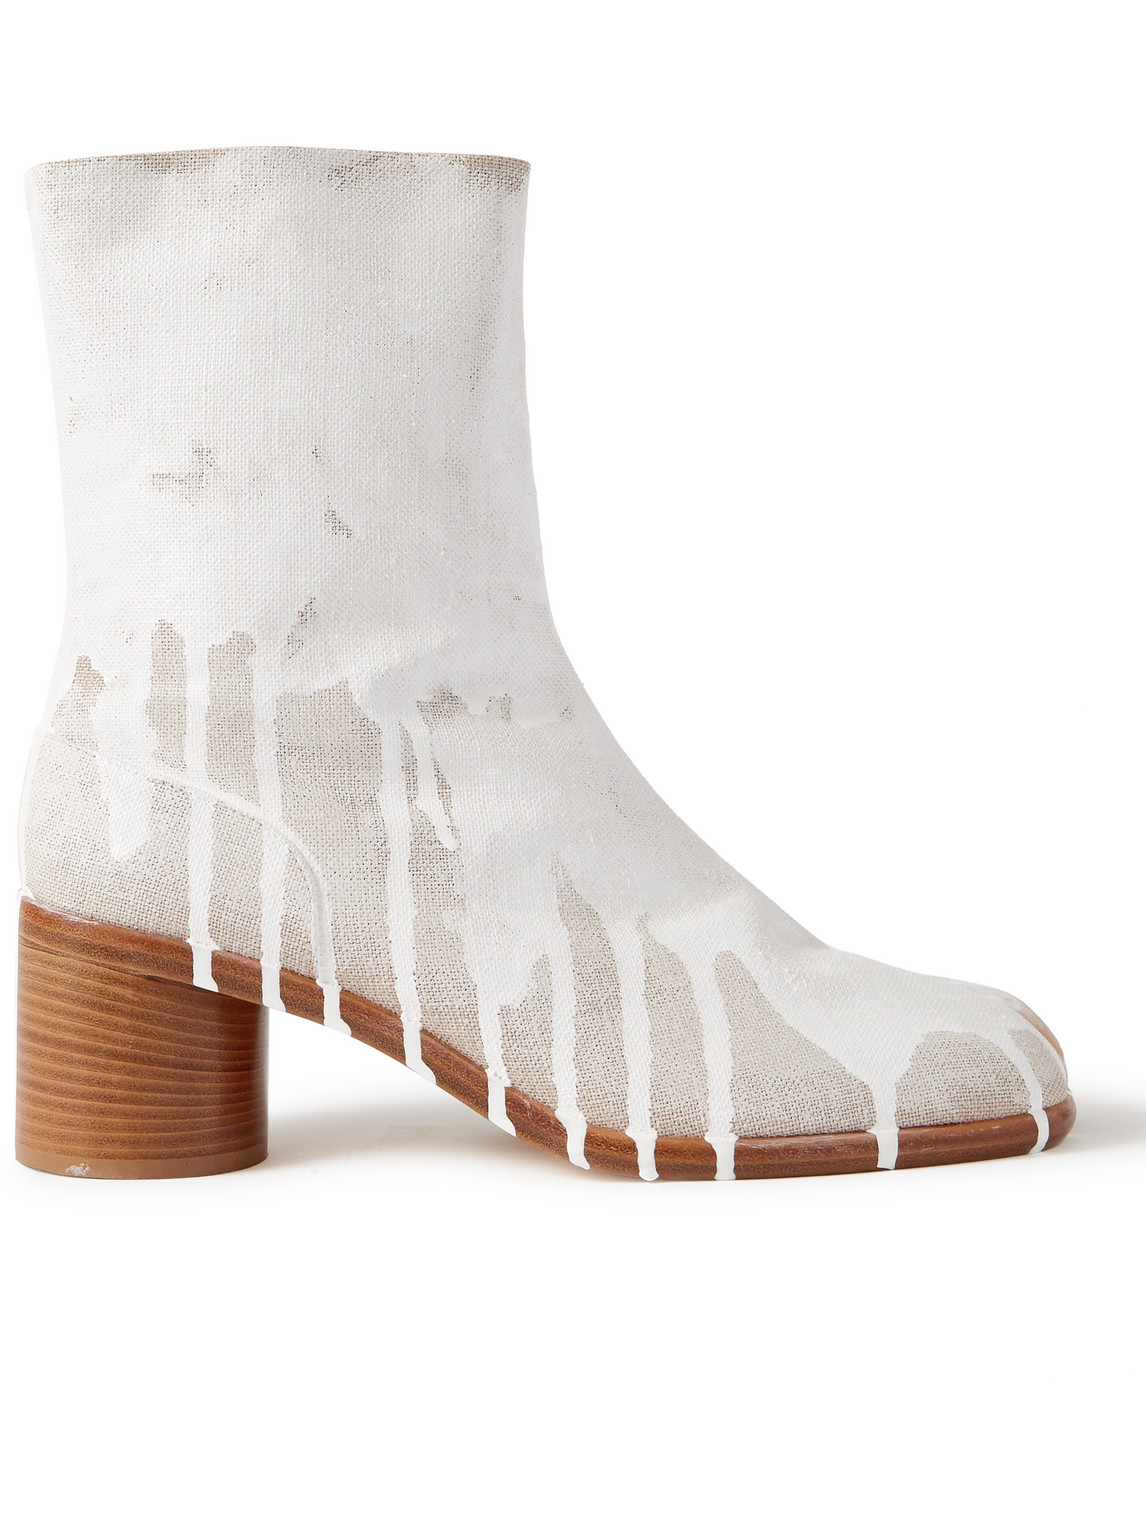 Maison Margiela Tabi Painted Linen Boots In White